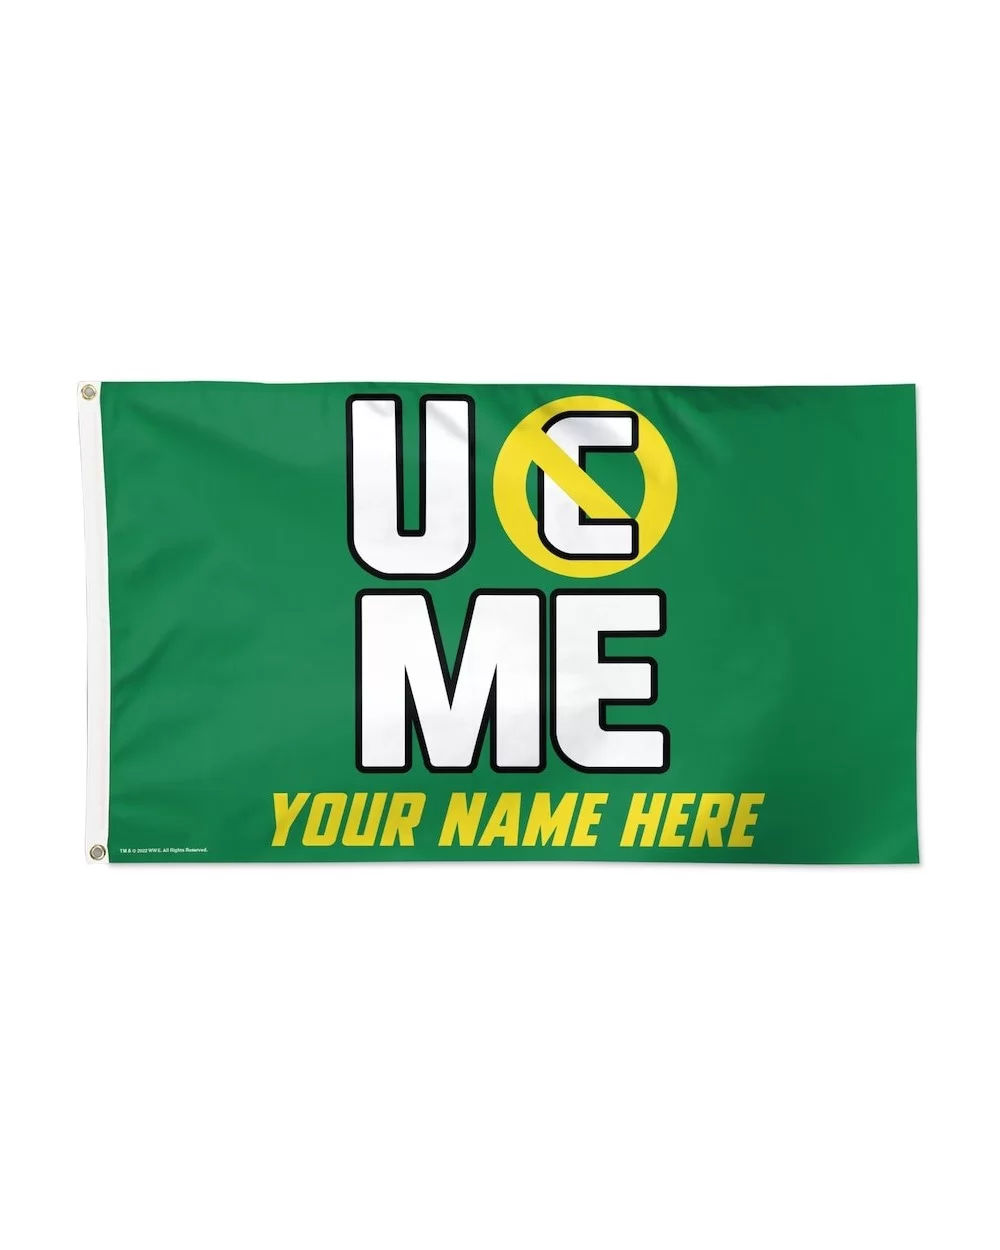 WinCraft John Cena 3' x 5' One-Sided Deluxe Personalized Flag $14.00 Home & Office